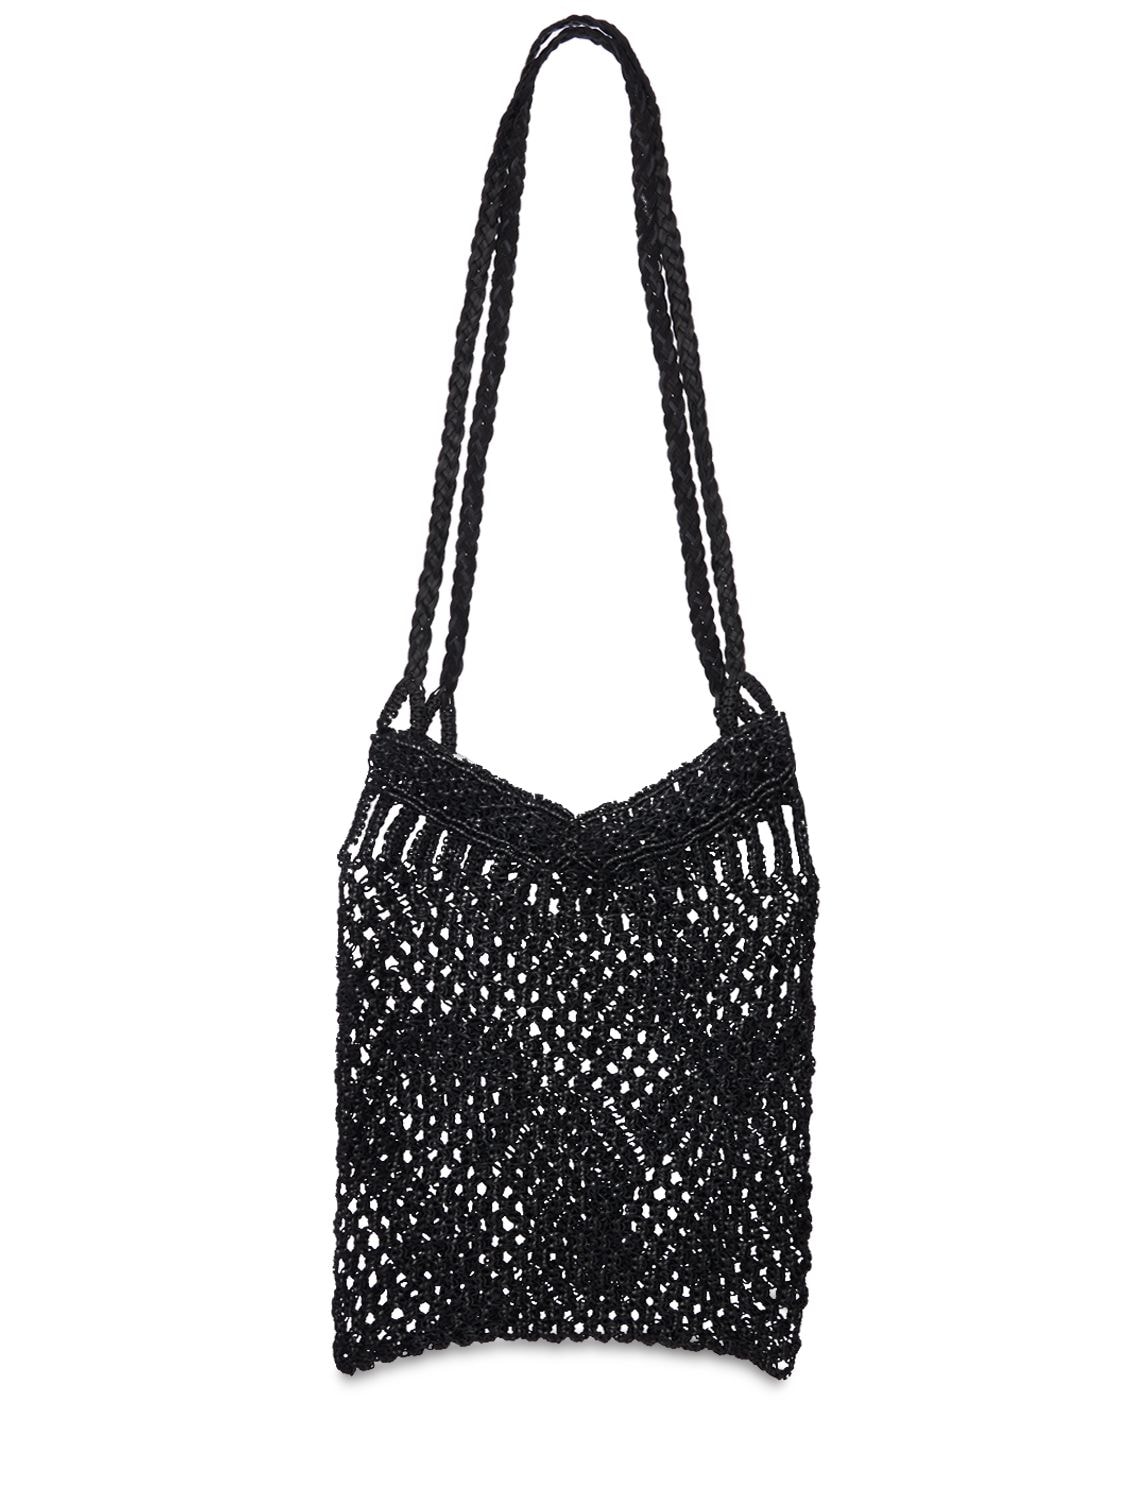 DRAGON DIFFUSION Knotted Macramé Leather Shoulder Bag